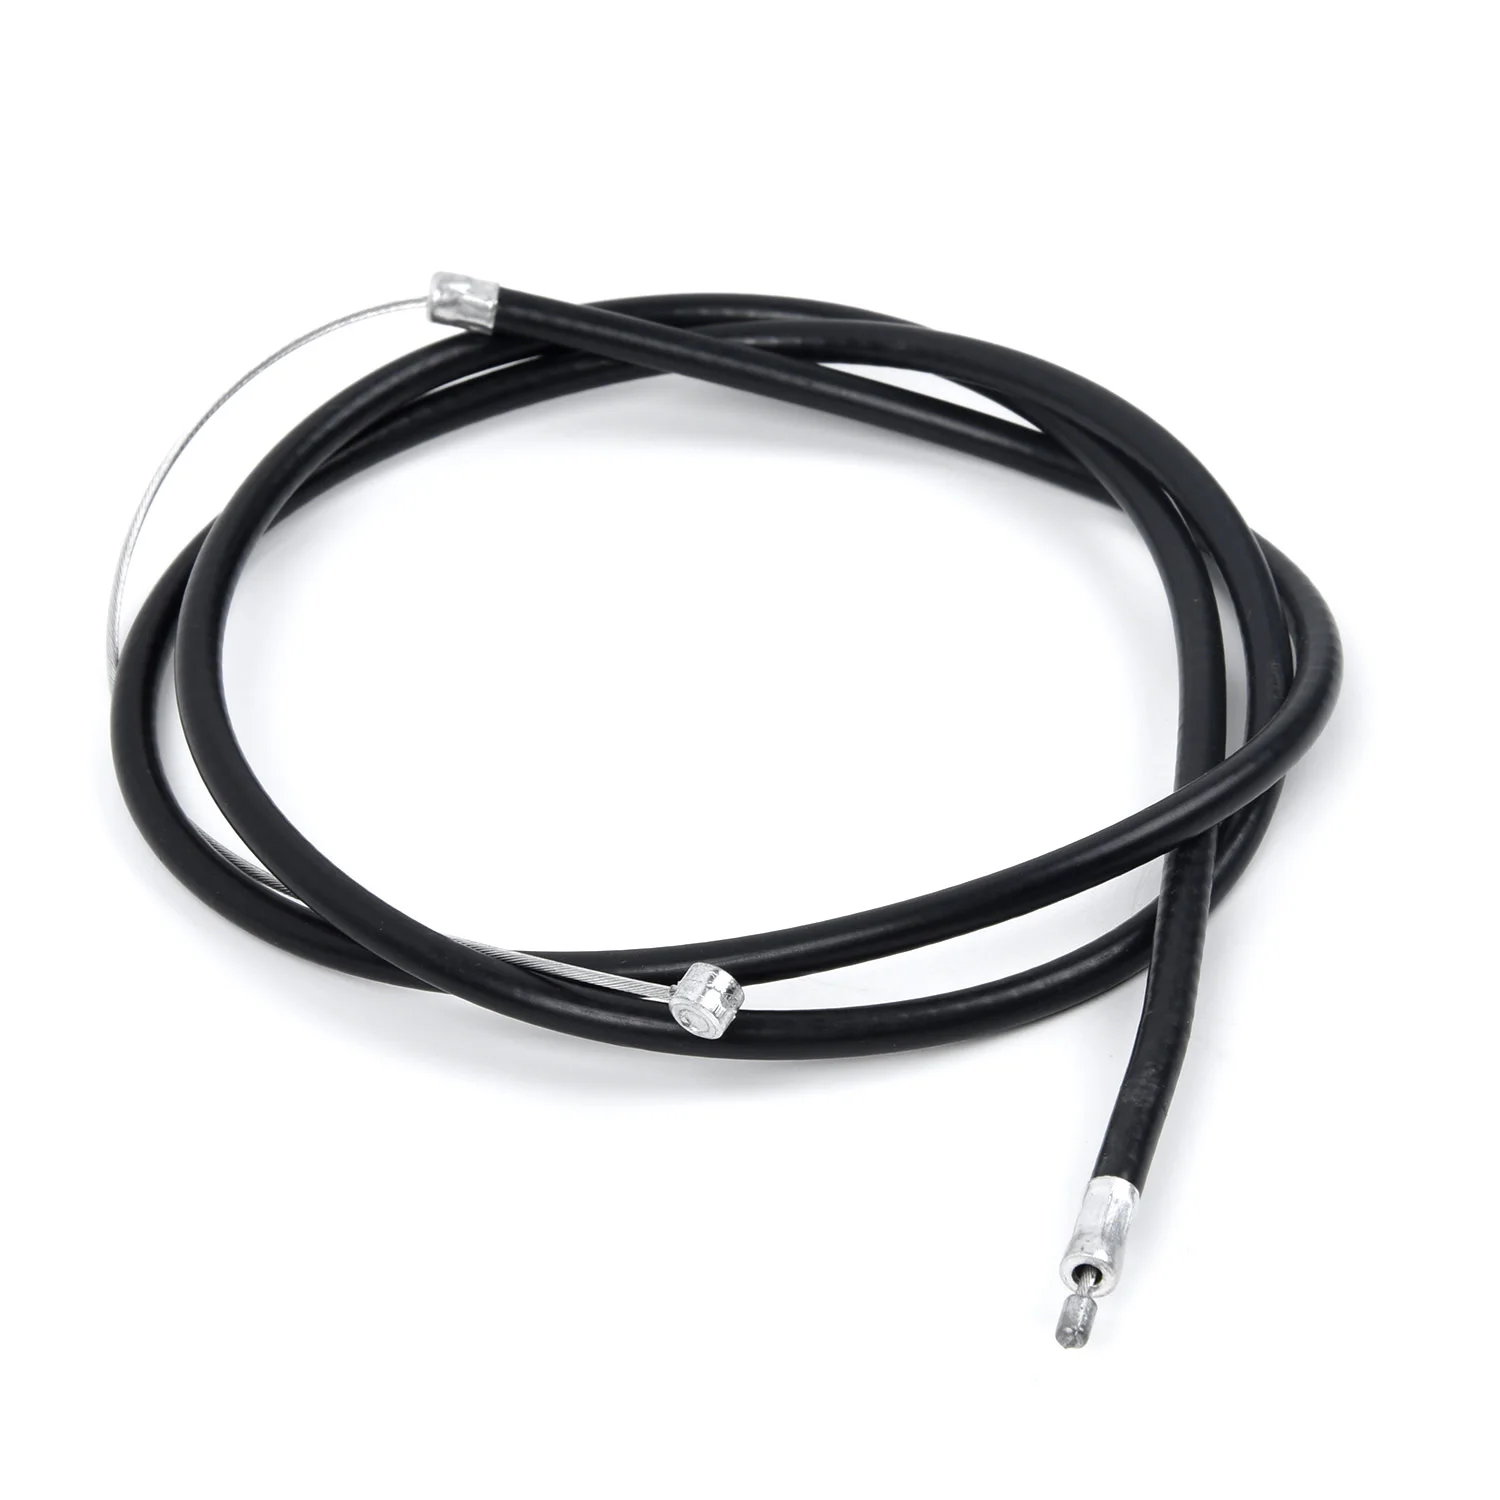 

90cm String Trimmer Throttle Cable For Stihl KA85R KW85 HT70 HT70K HT75 FS75 FS80 FS80R FS85 FS85R Garden Power Tools